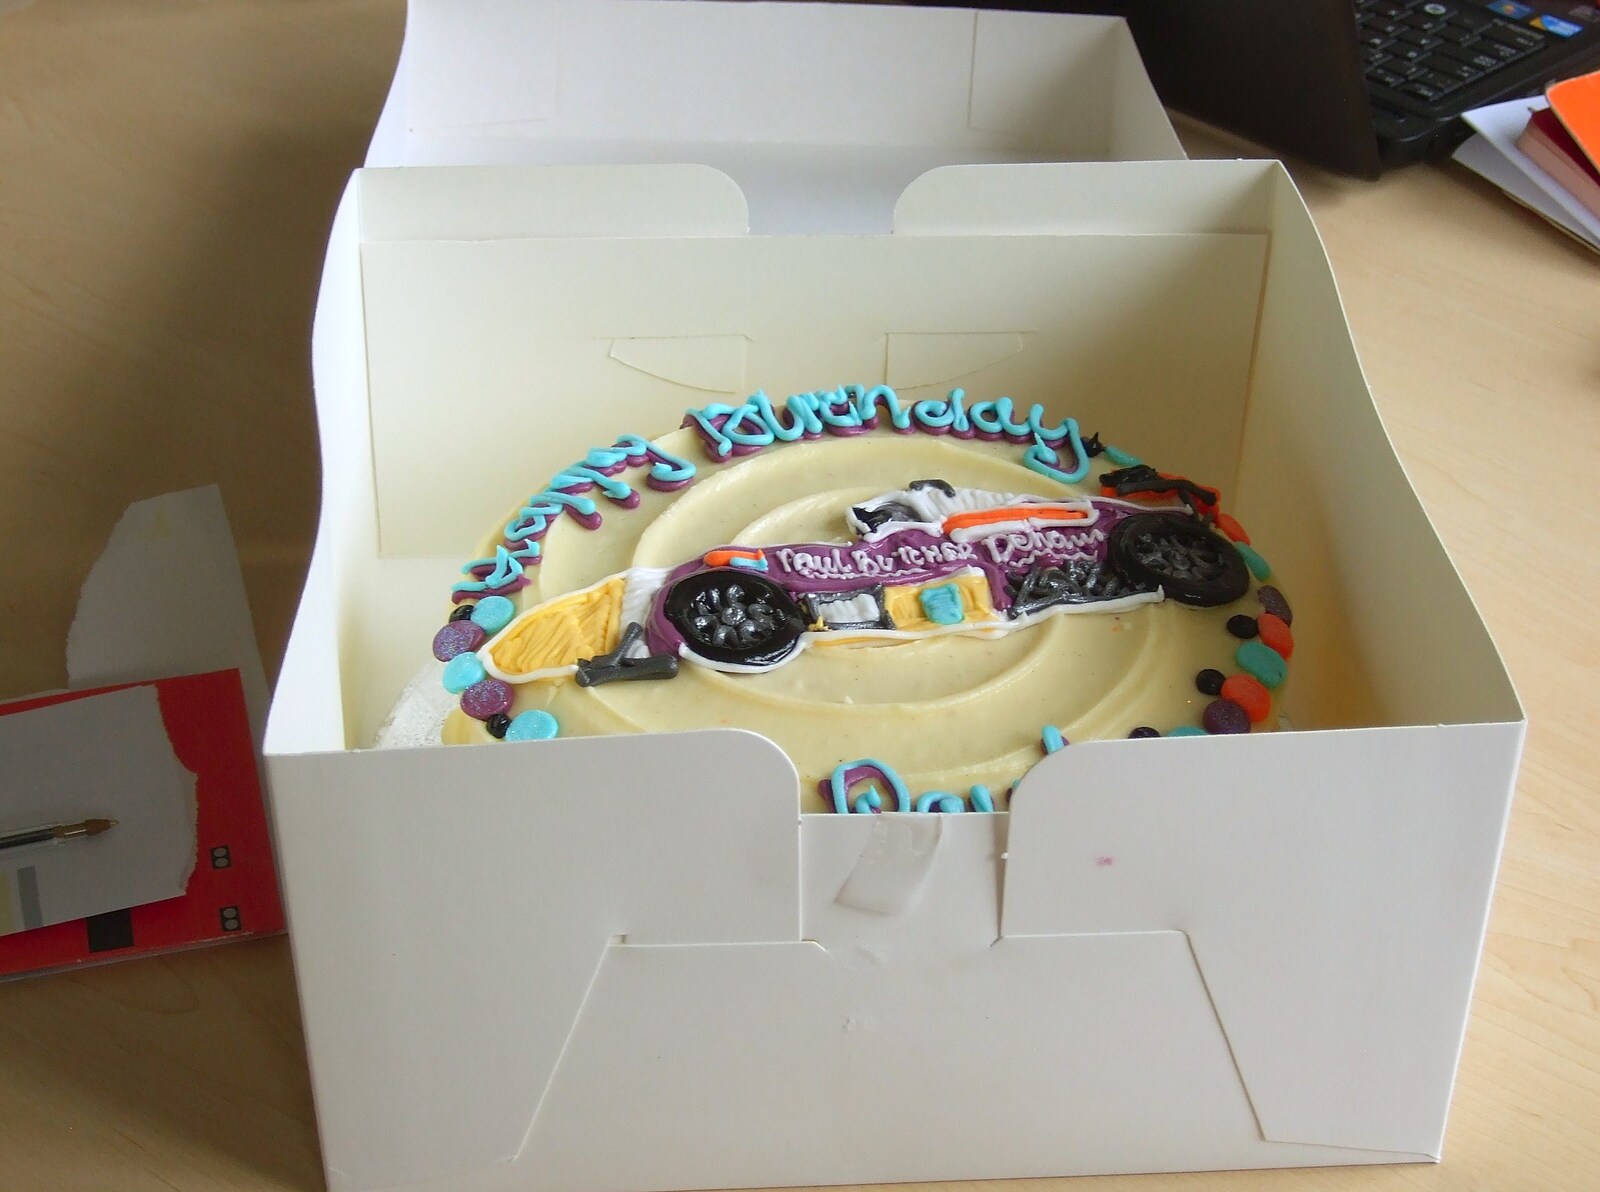 Paul's custom racing-car cake from Paul's TouchType Birthday and the Old Chap Visits, London and Brome, Suffolk - 9th October 2011